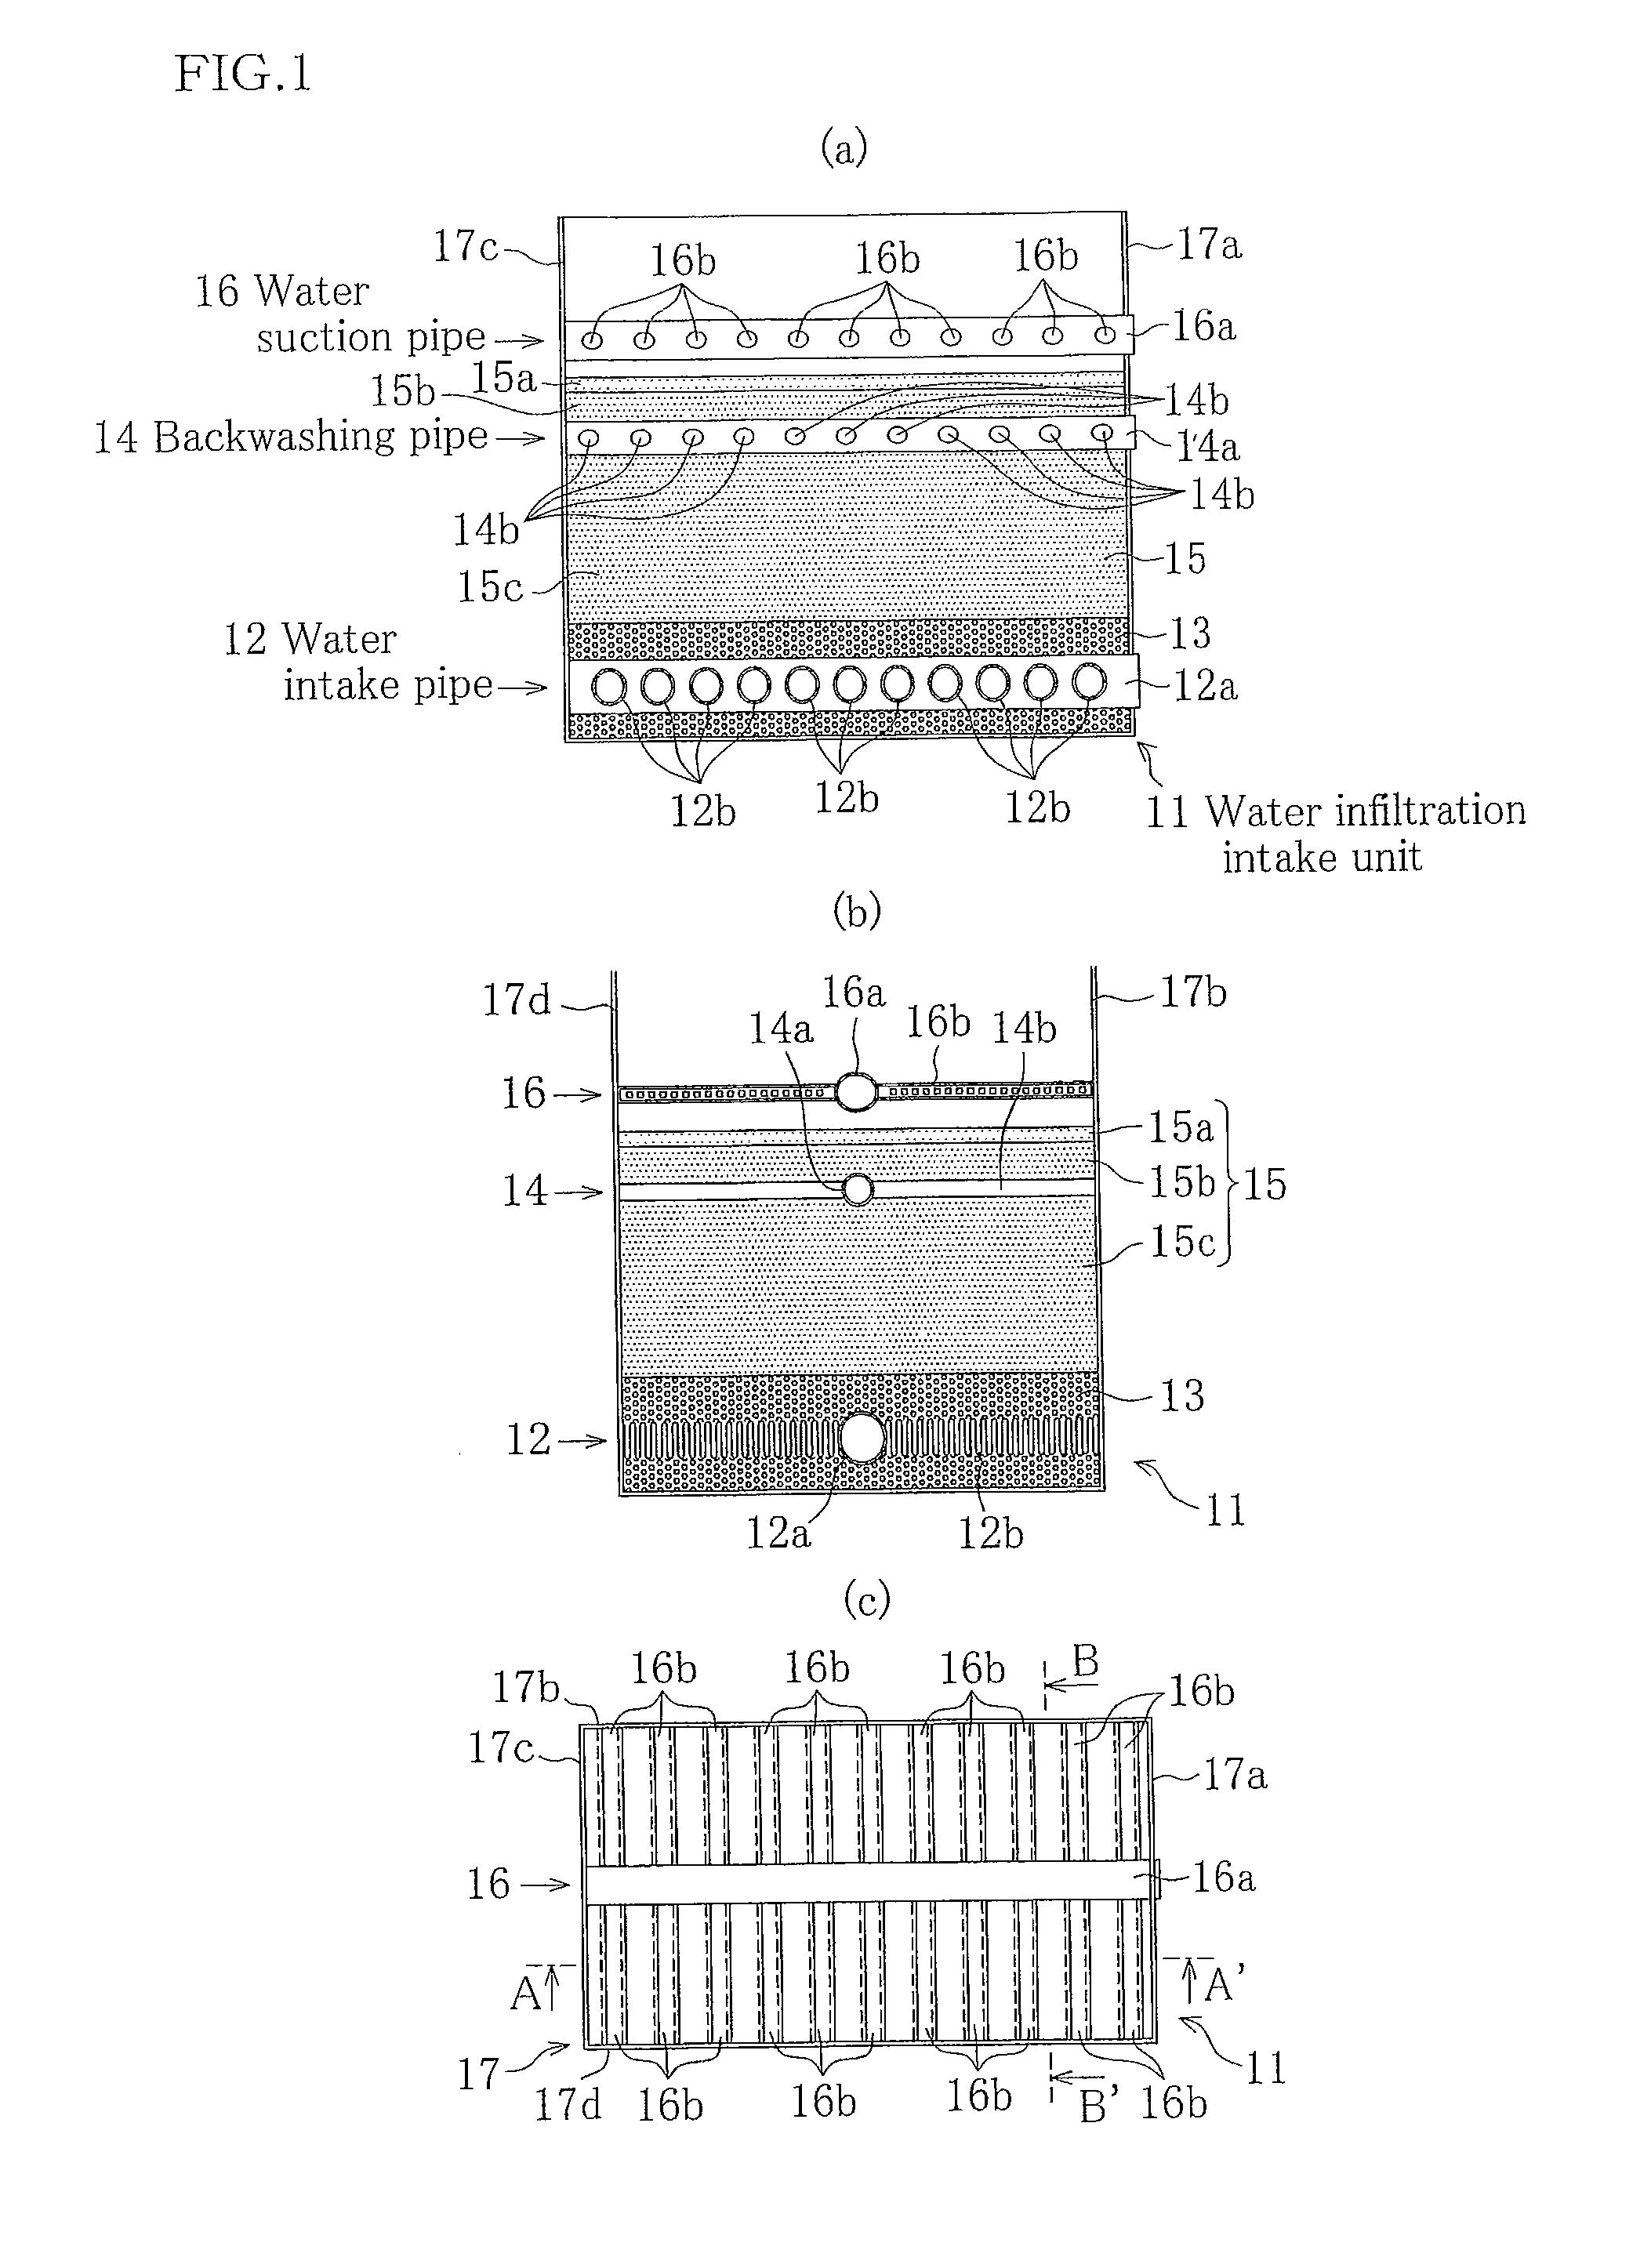 Seawater infiltration method and water infiltration intake unit